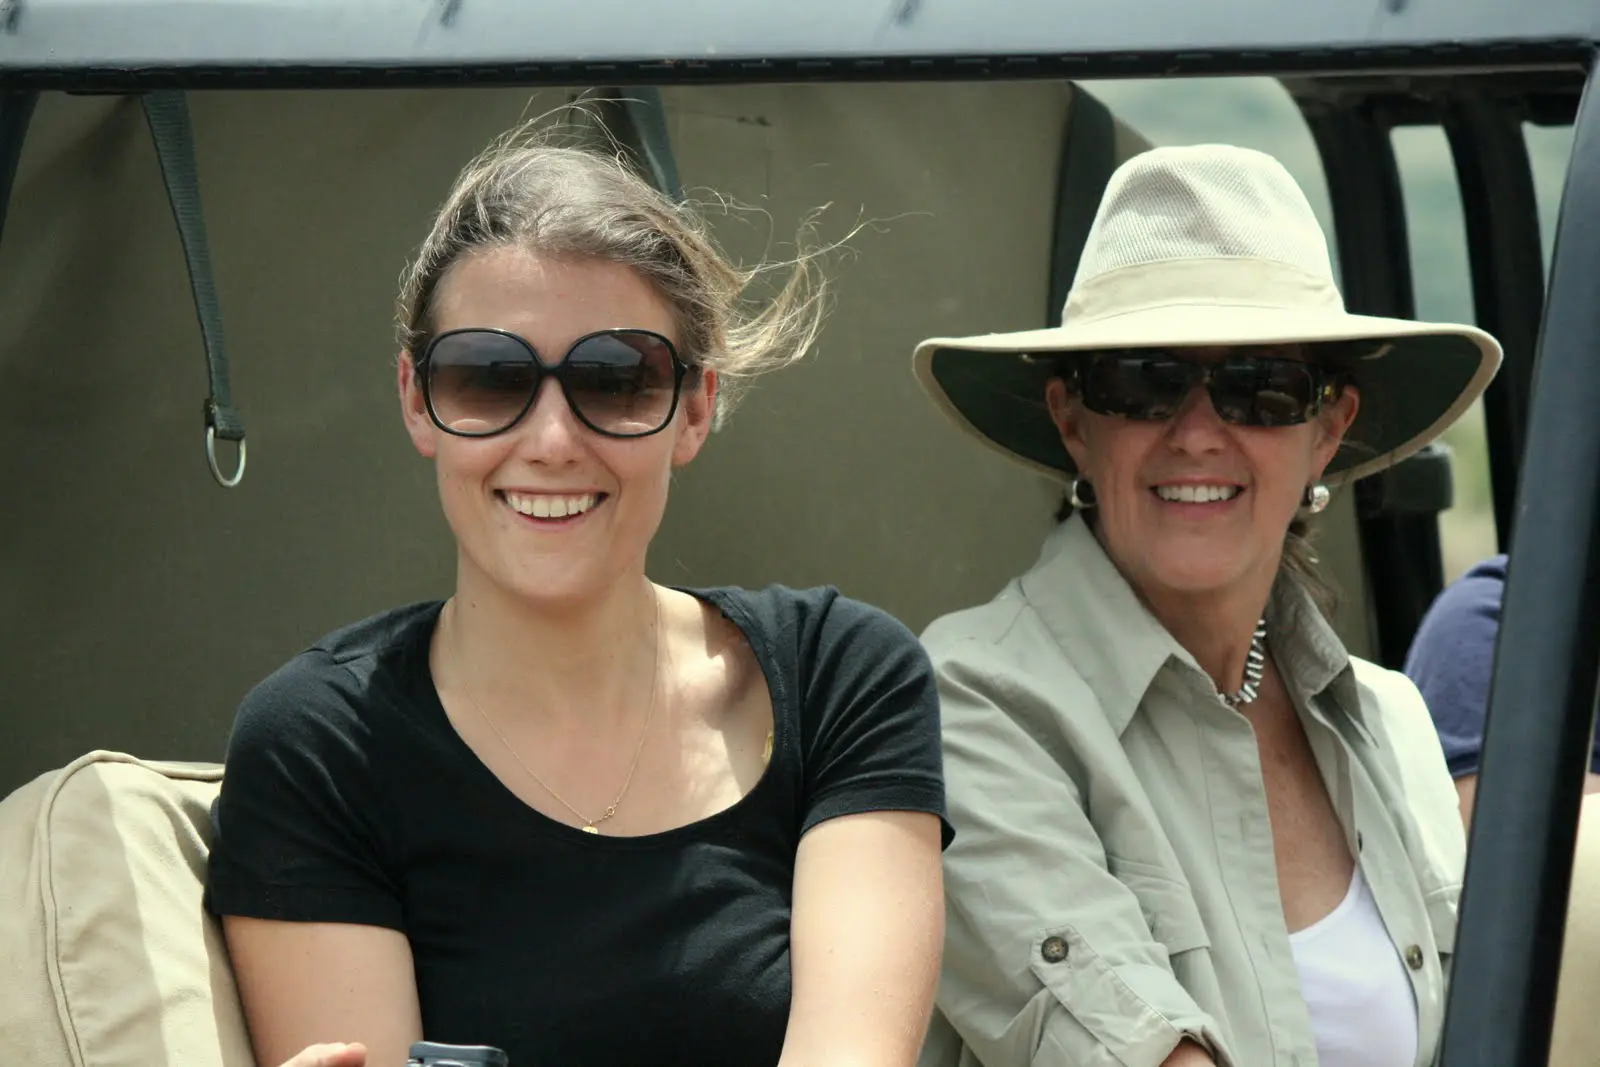 The mother-daughter duo back on safari.